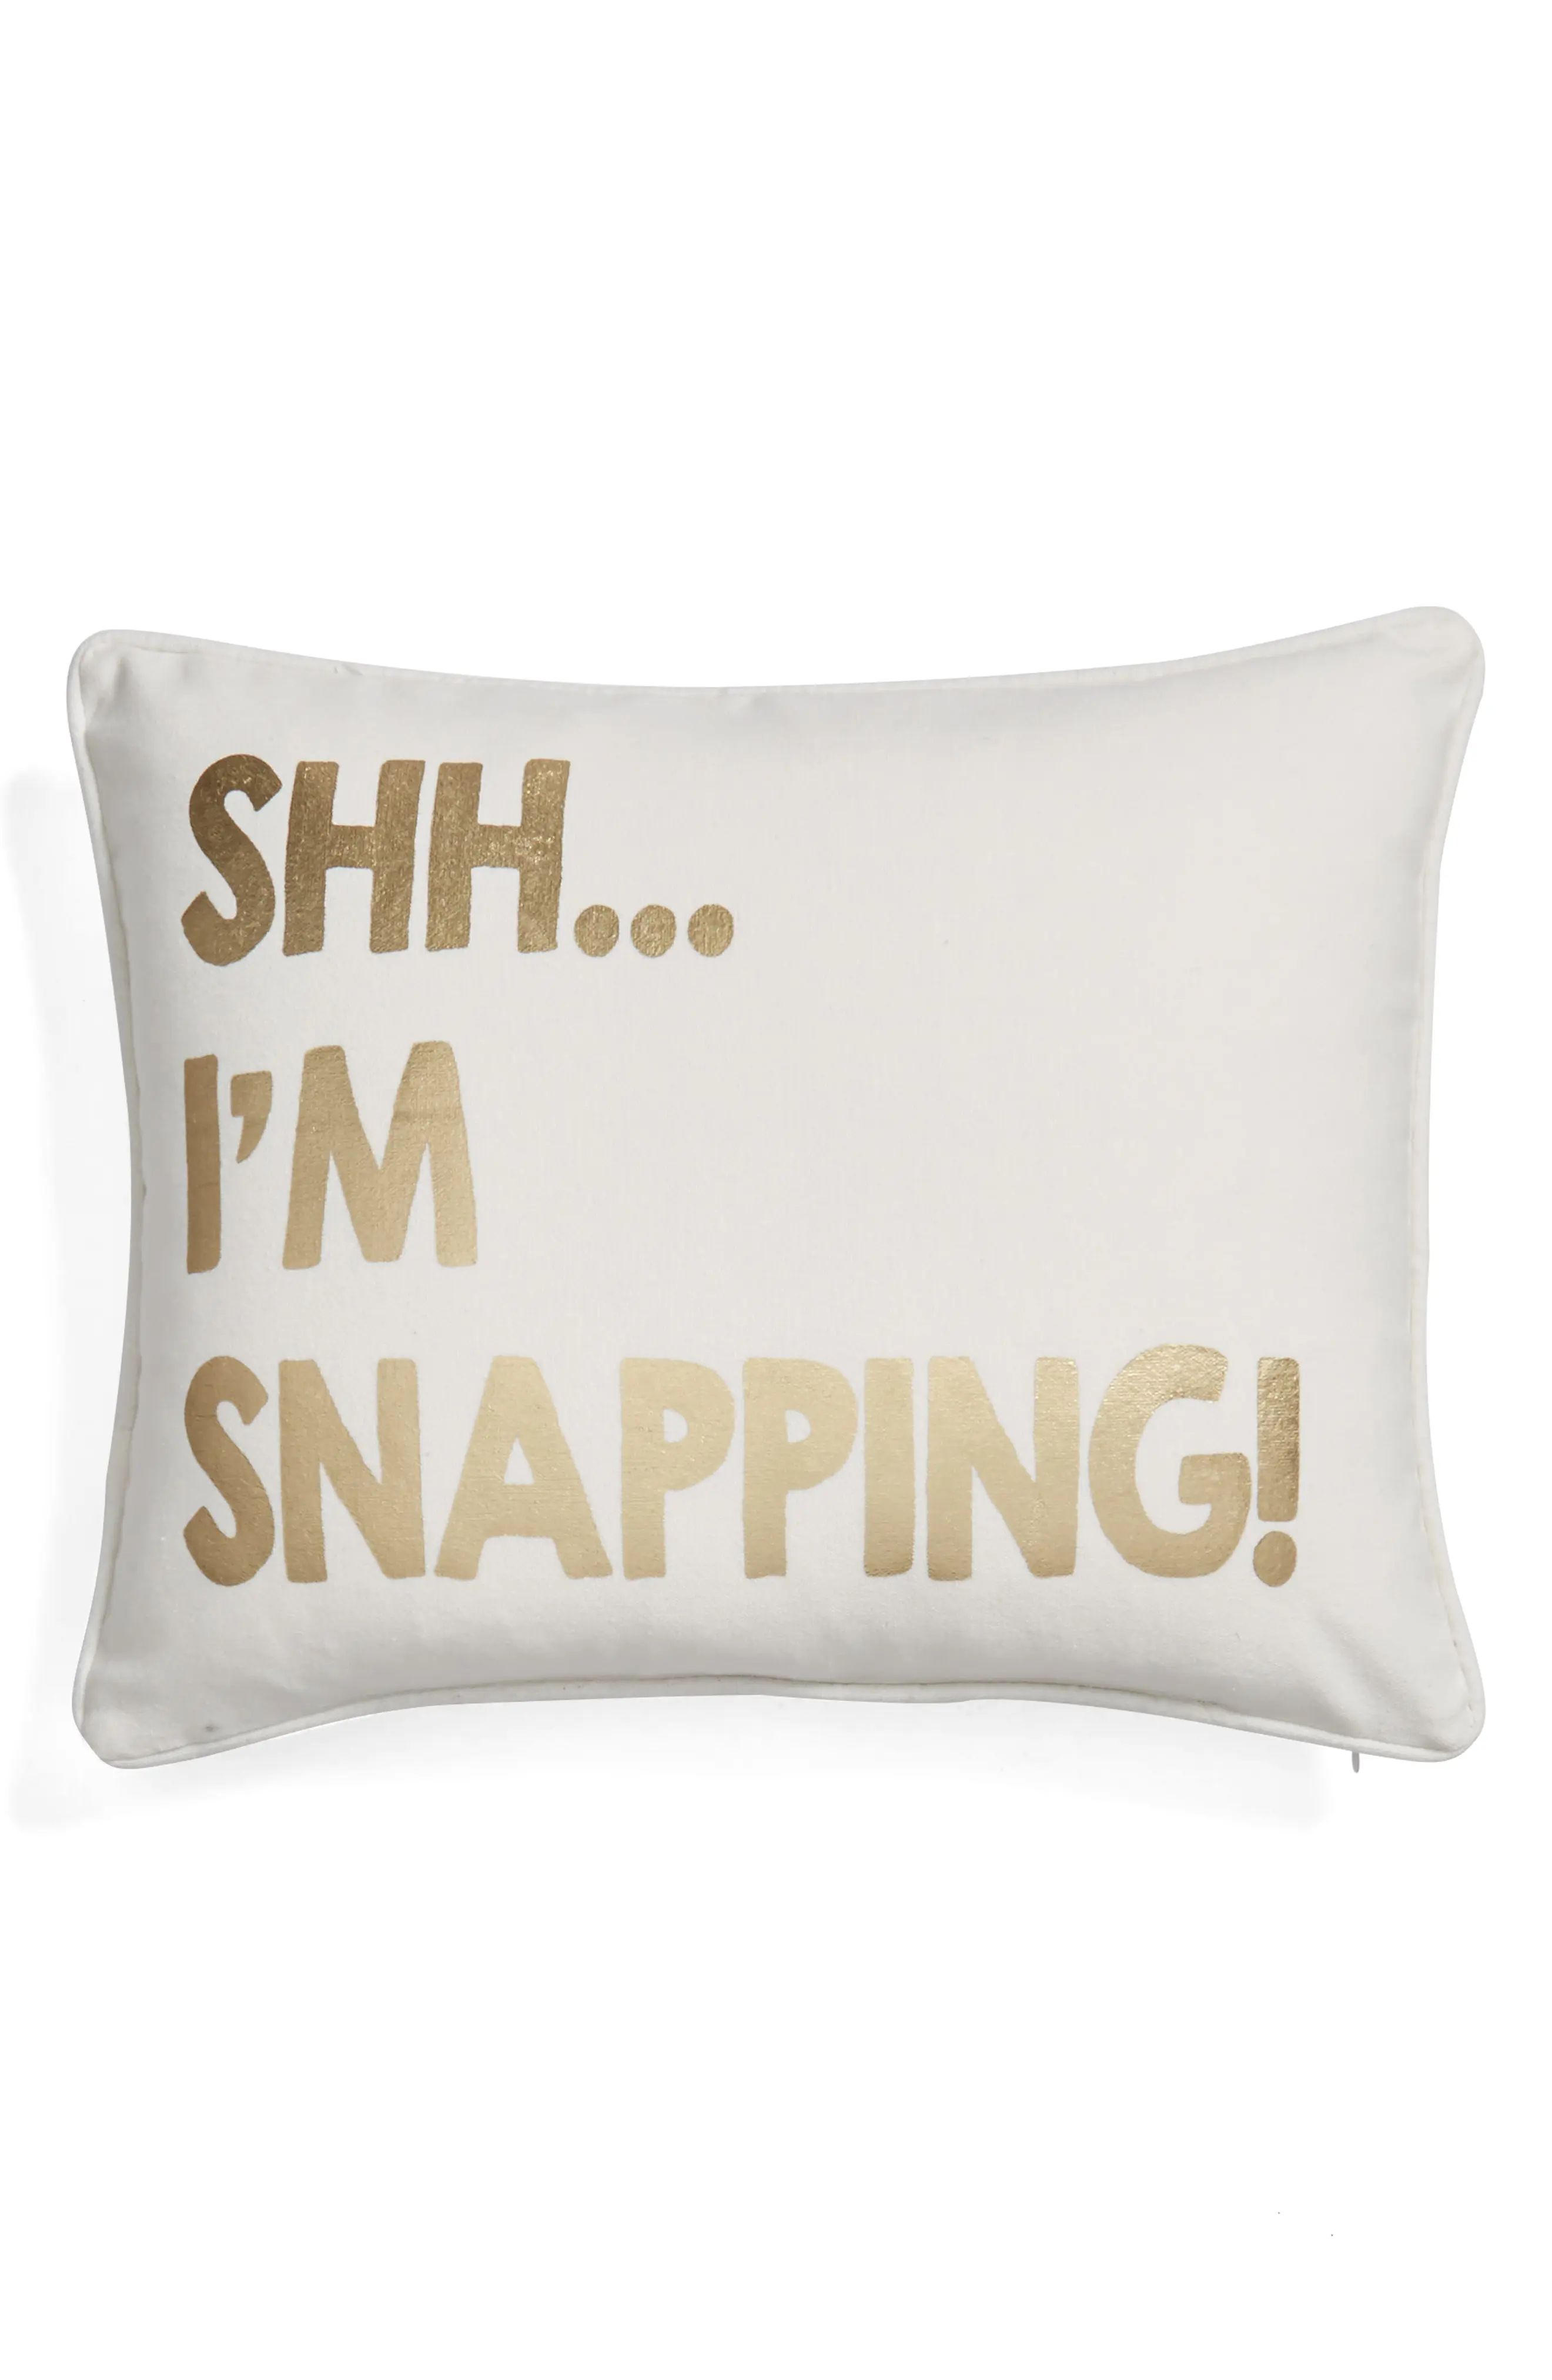 Shh I'm Snapping Accent Pillow | Nordstrom